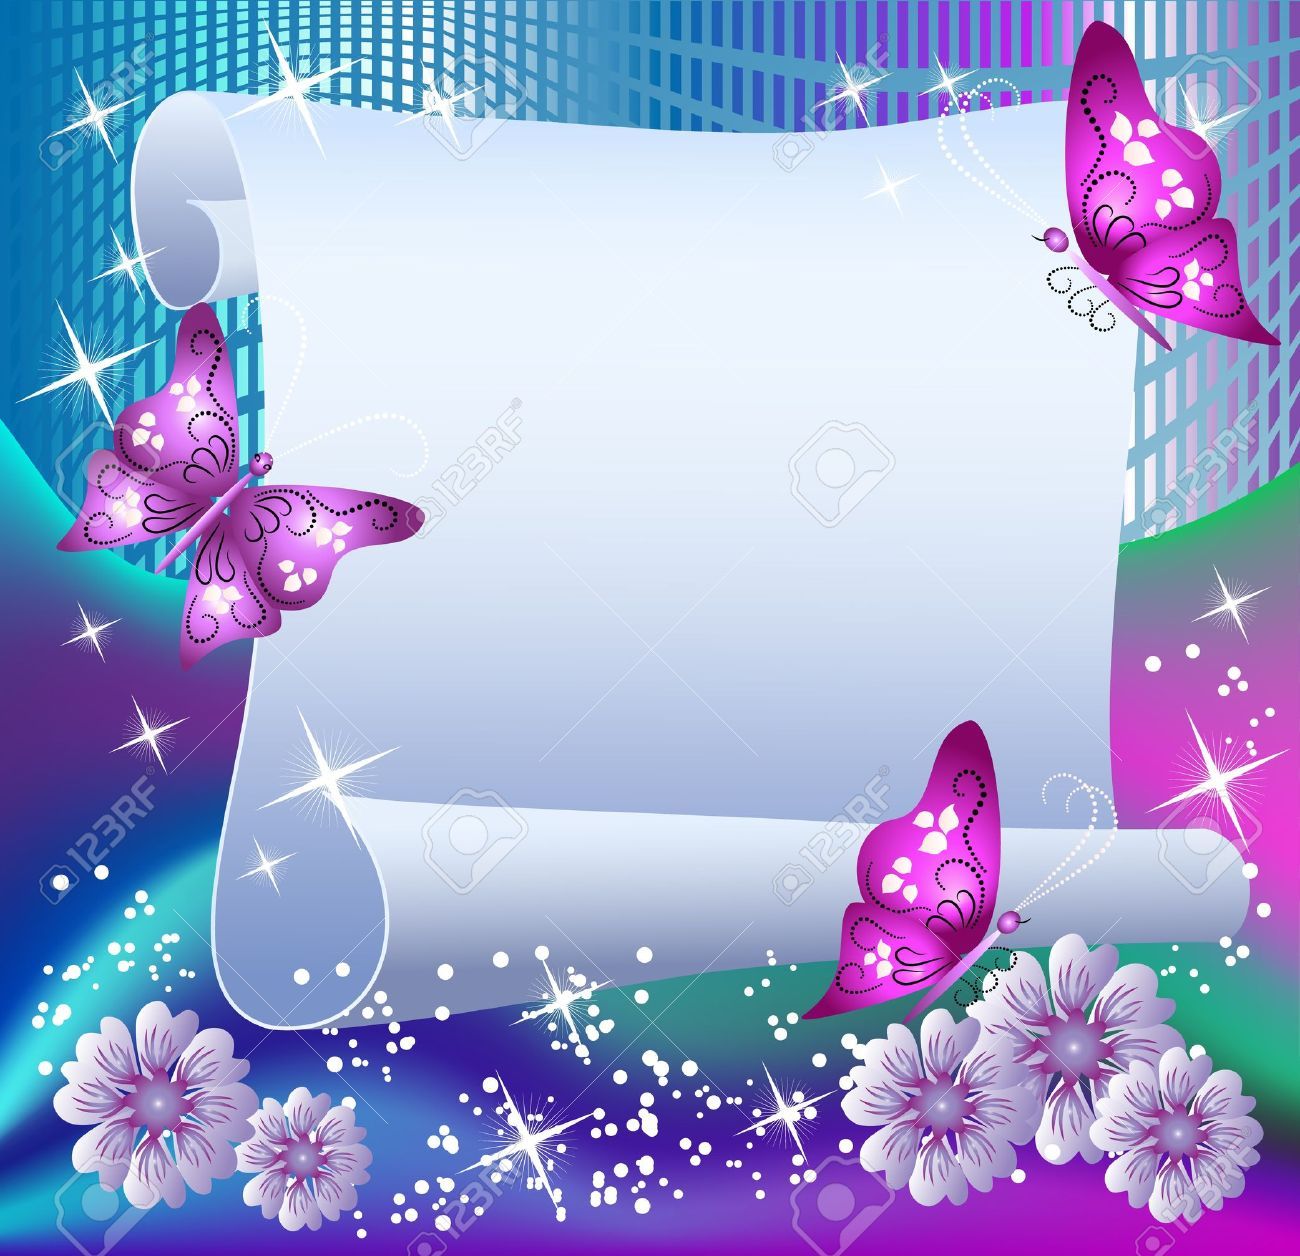 Free download Magic Background With Paper Butterflies And A Place For Text [1300x1256] for your Desktop, Mobile & Tablet. Explore Butterfly Background Free. Butterfly Wallpaper Free, Free Wallpaper Butterfly